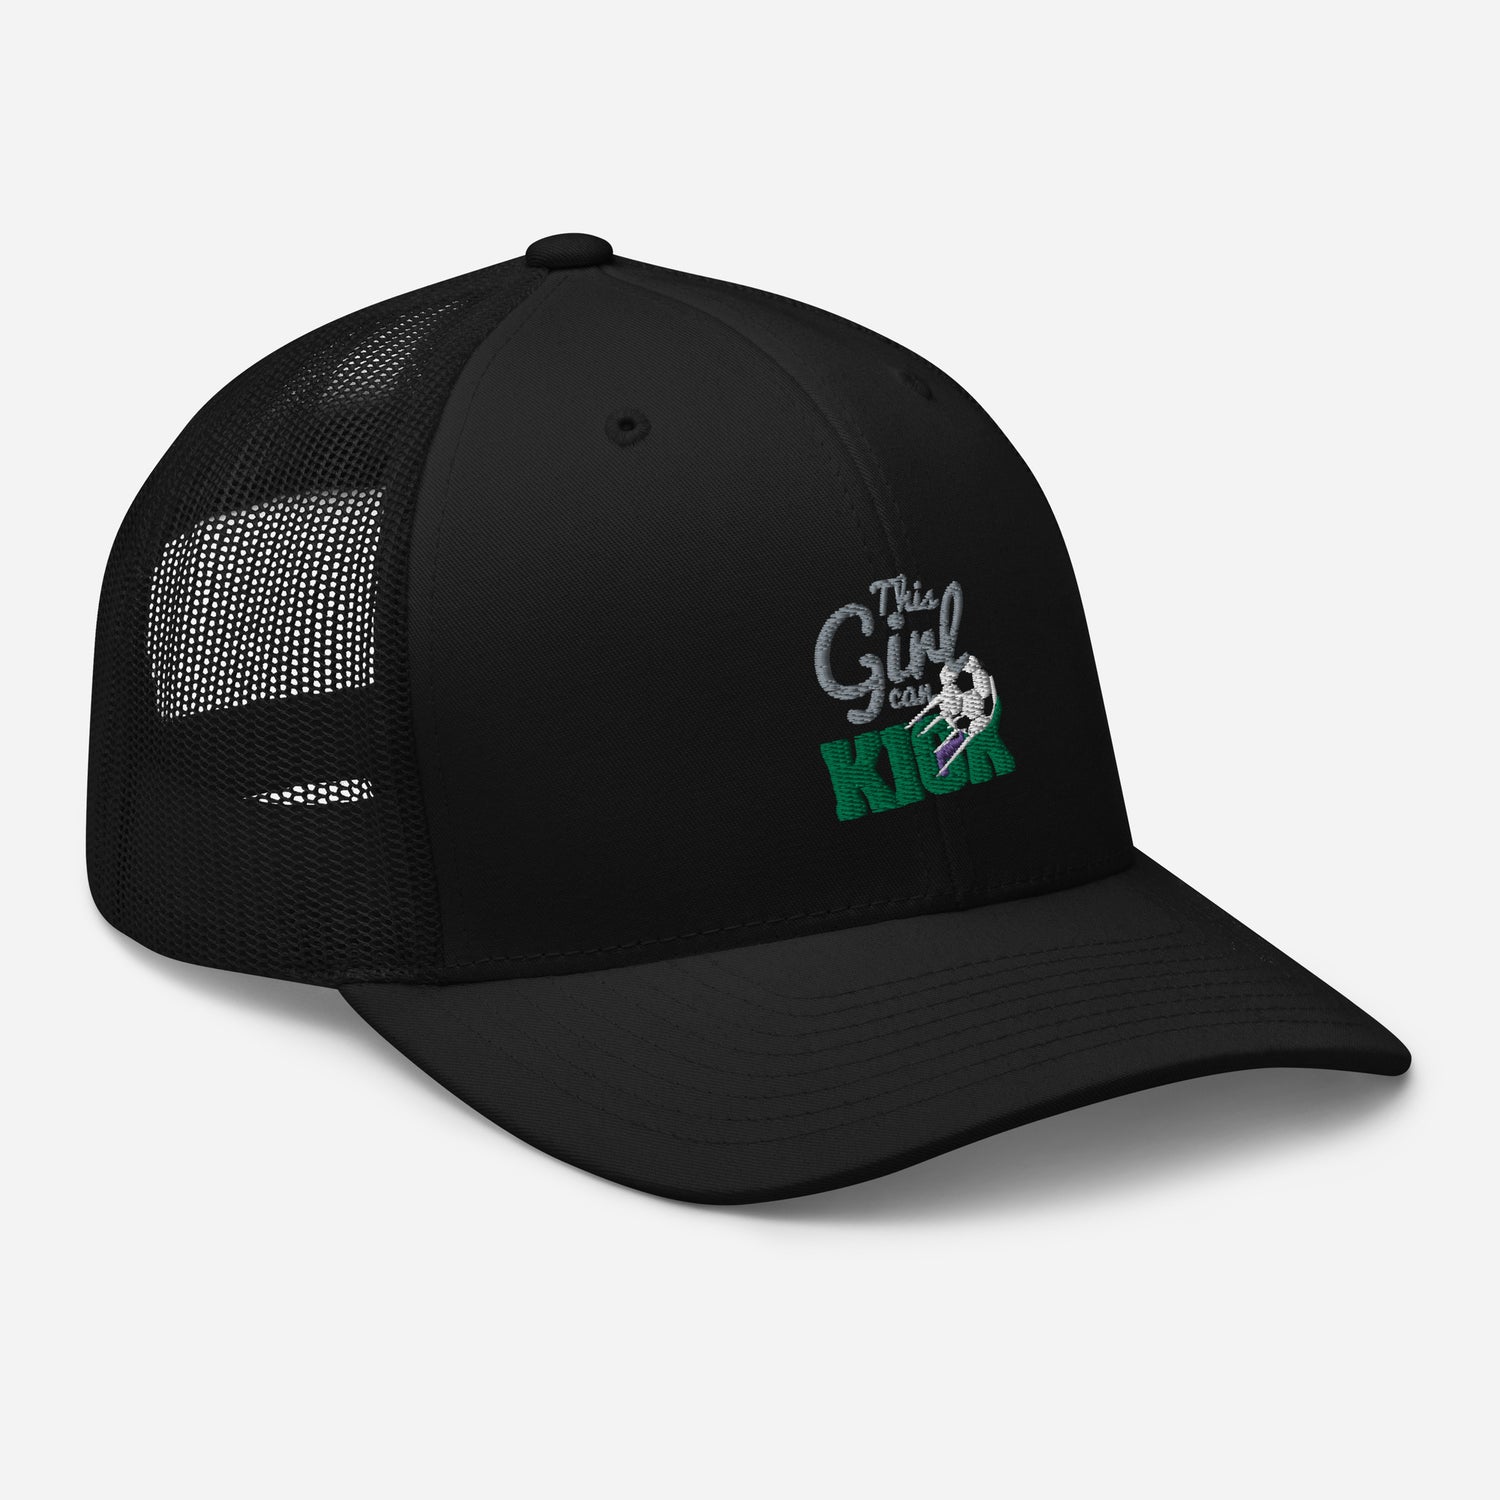 Graphic Print Sports Cap for Football Lovers